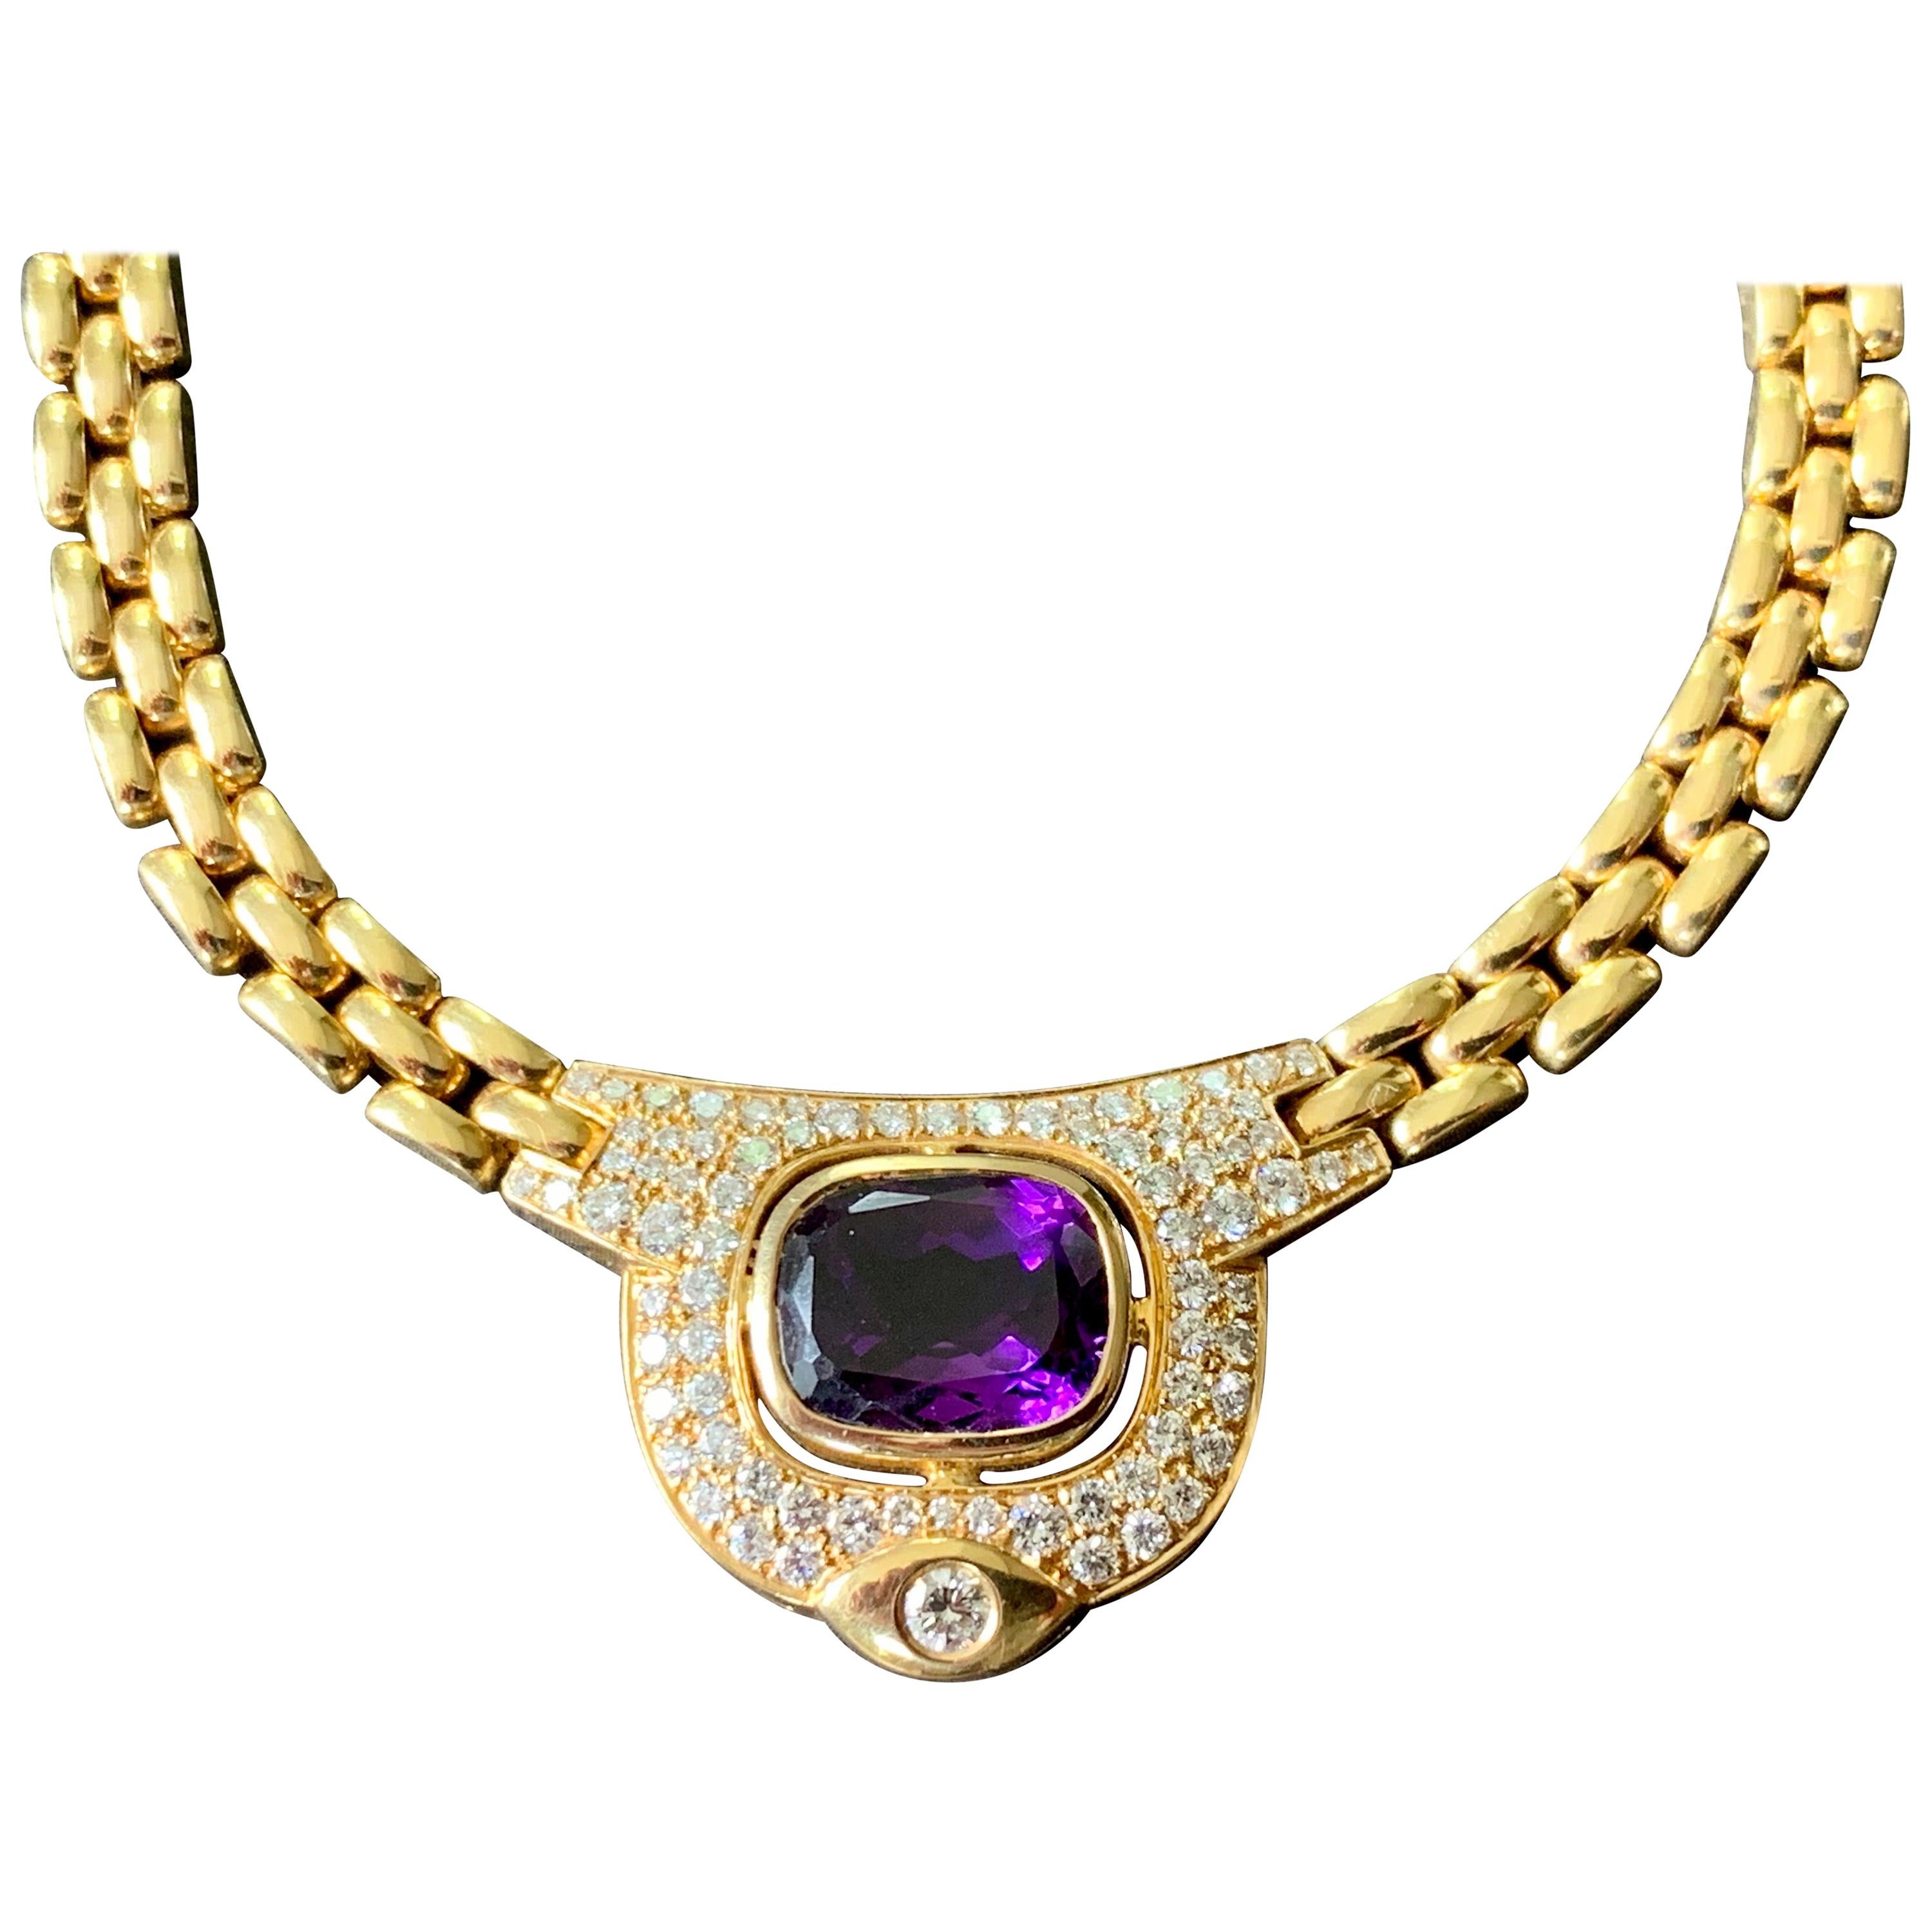 Vintage 18 K Gold Link Chain Necklace with Amethyst and Diamonds by Kurz Zurich For Sale